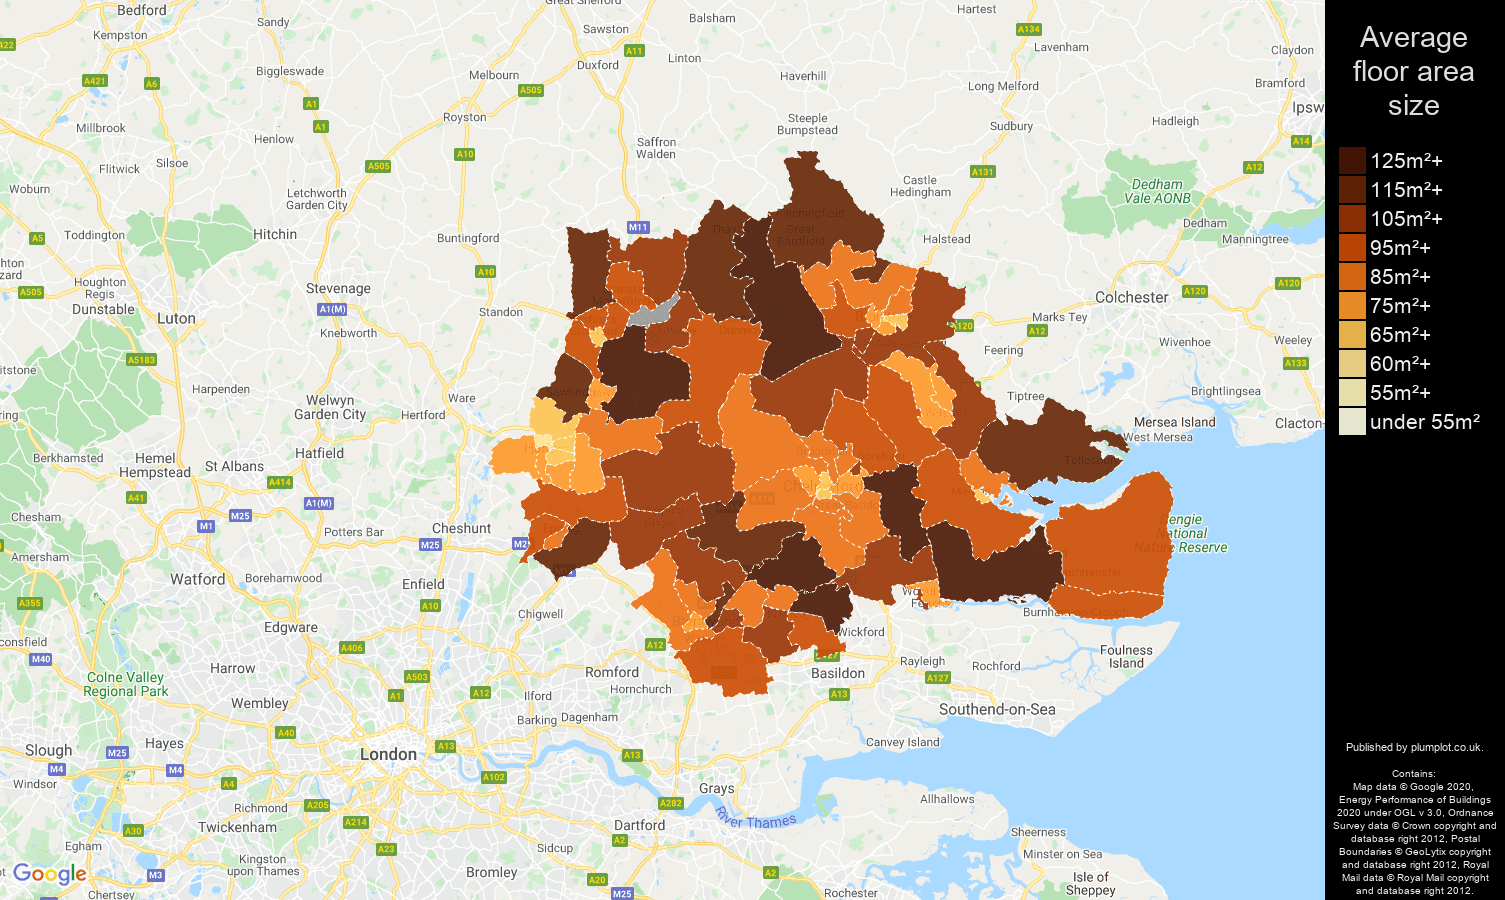 Chelmsford map of average floor area size of properties